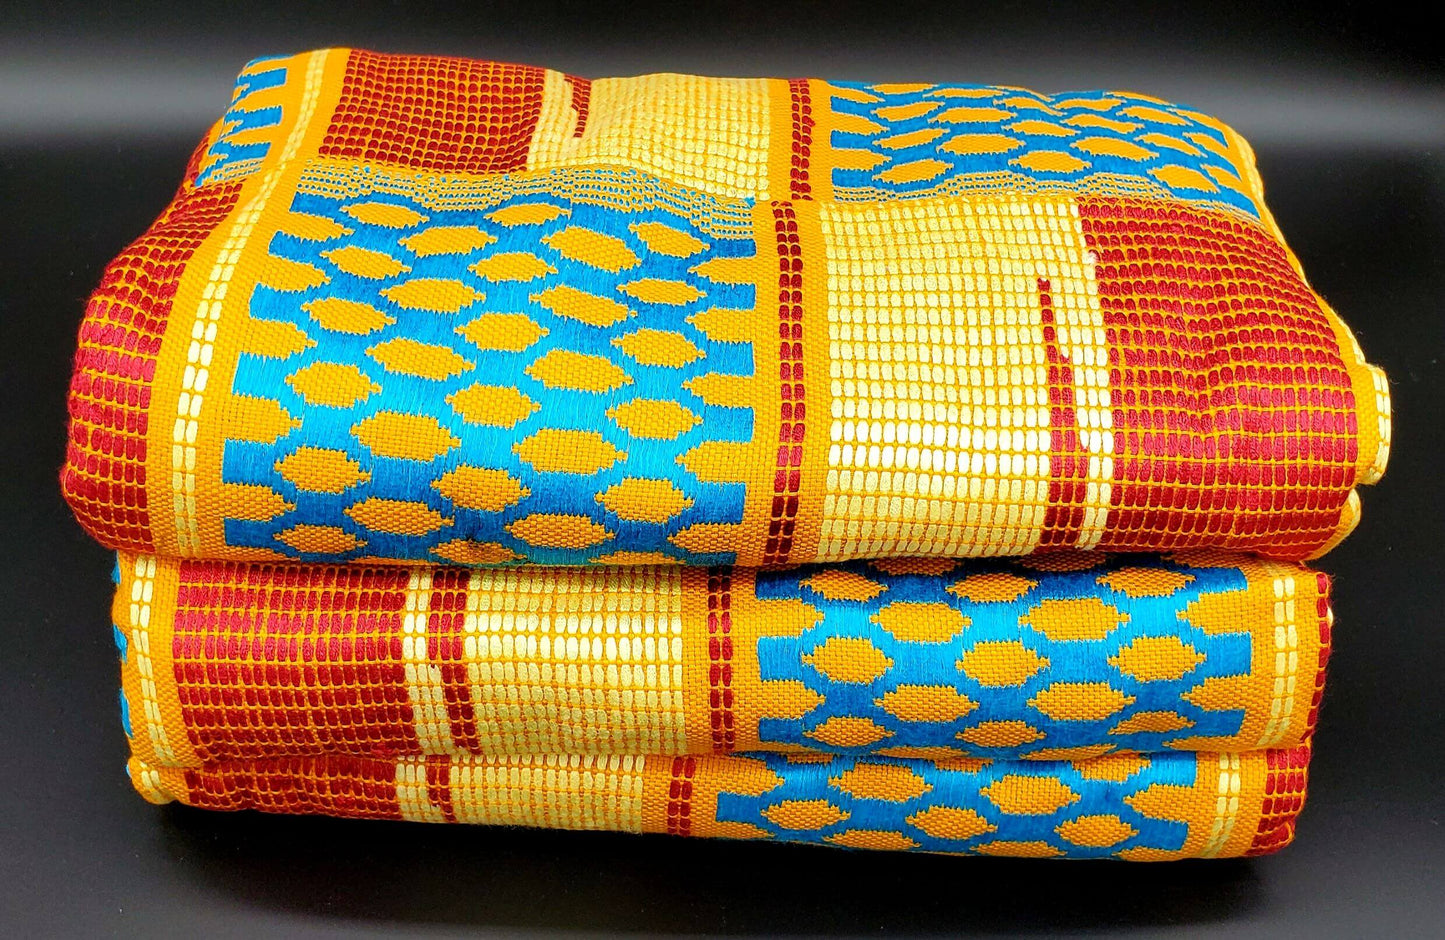 Multi-colored Traditional Kente (Mustard, White, Light Blue, Red, Gold) 3pcs